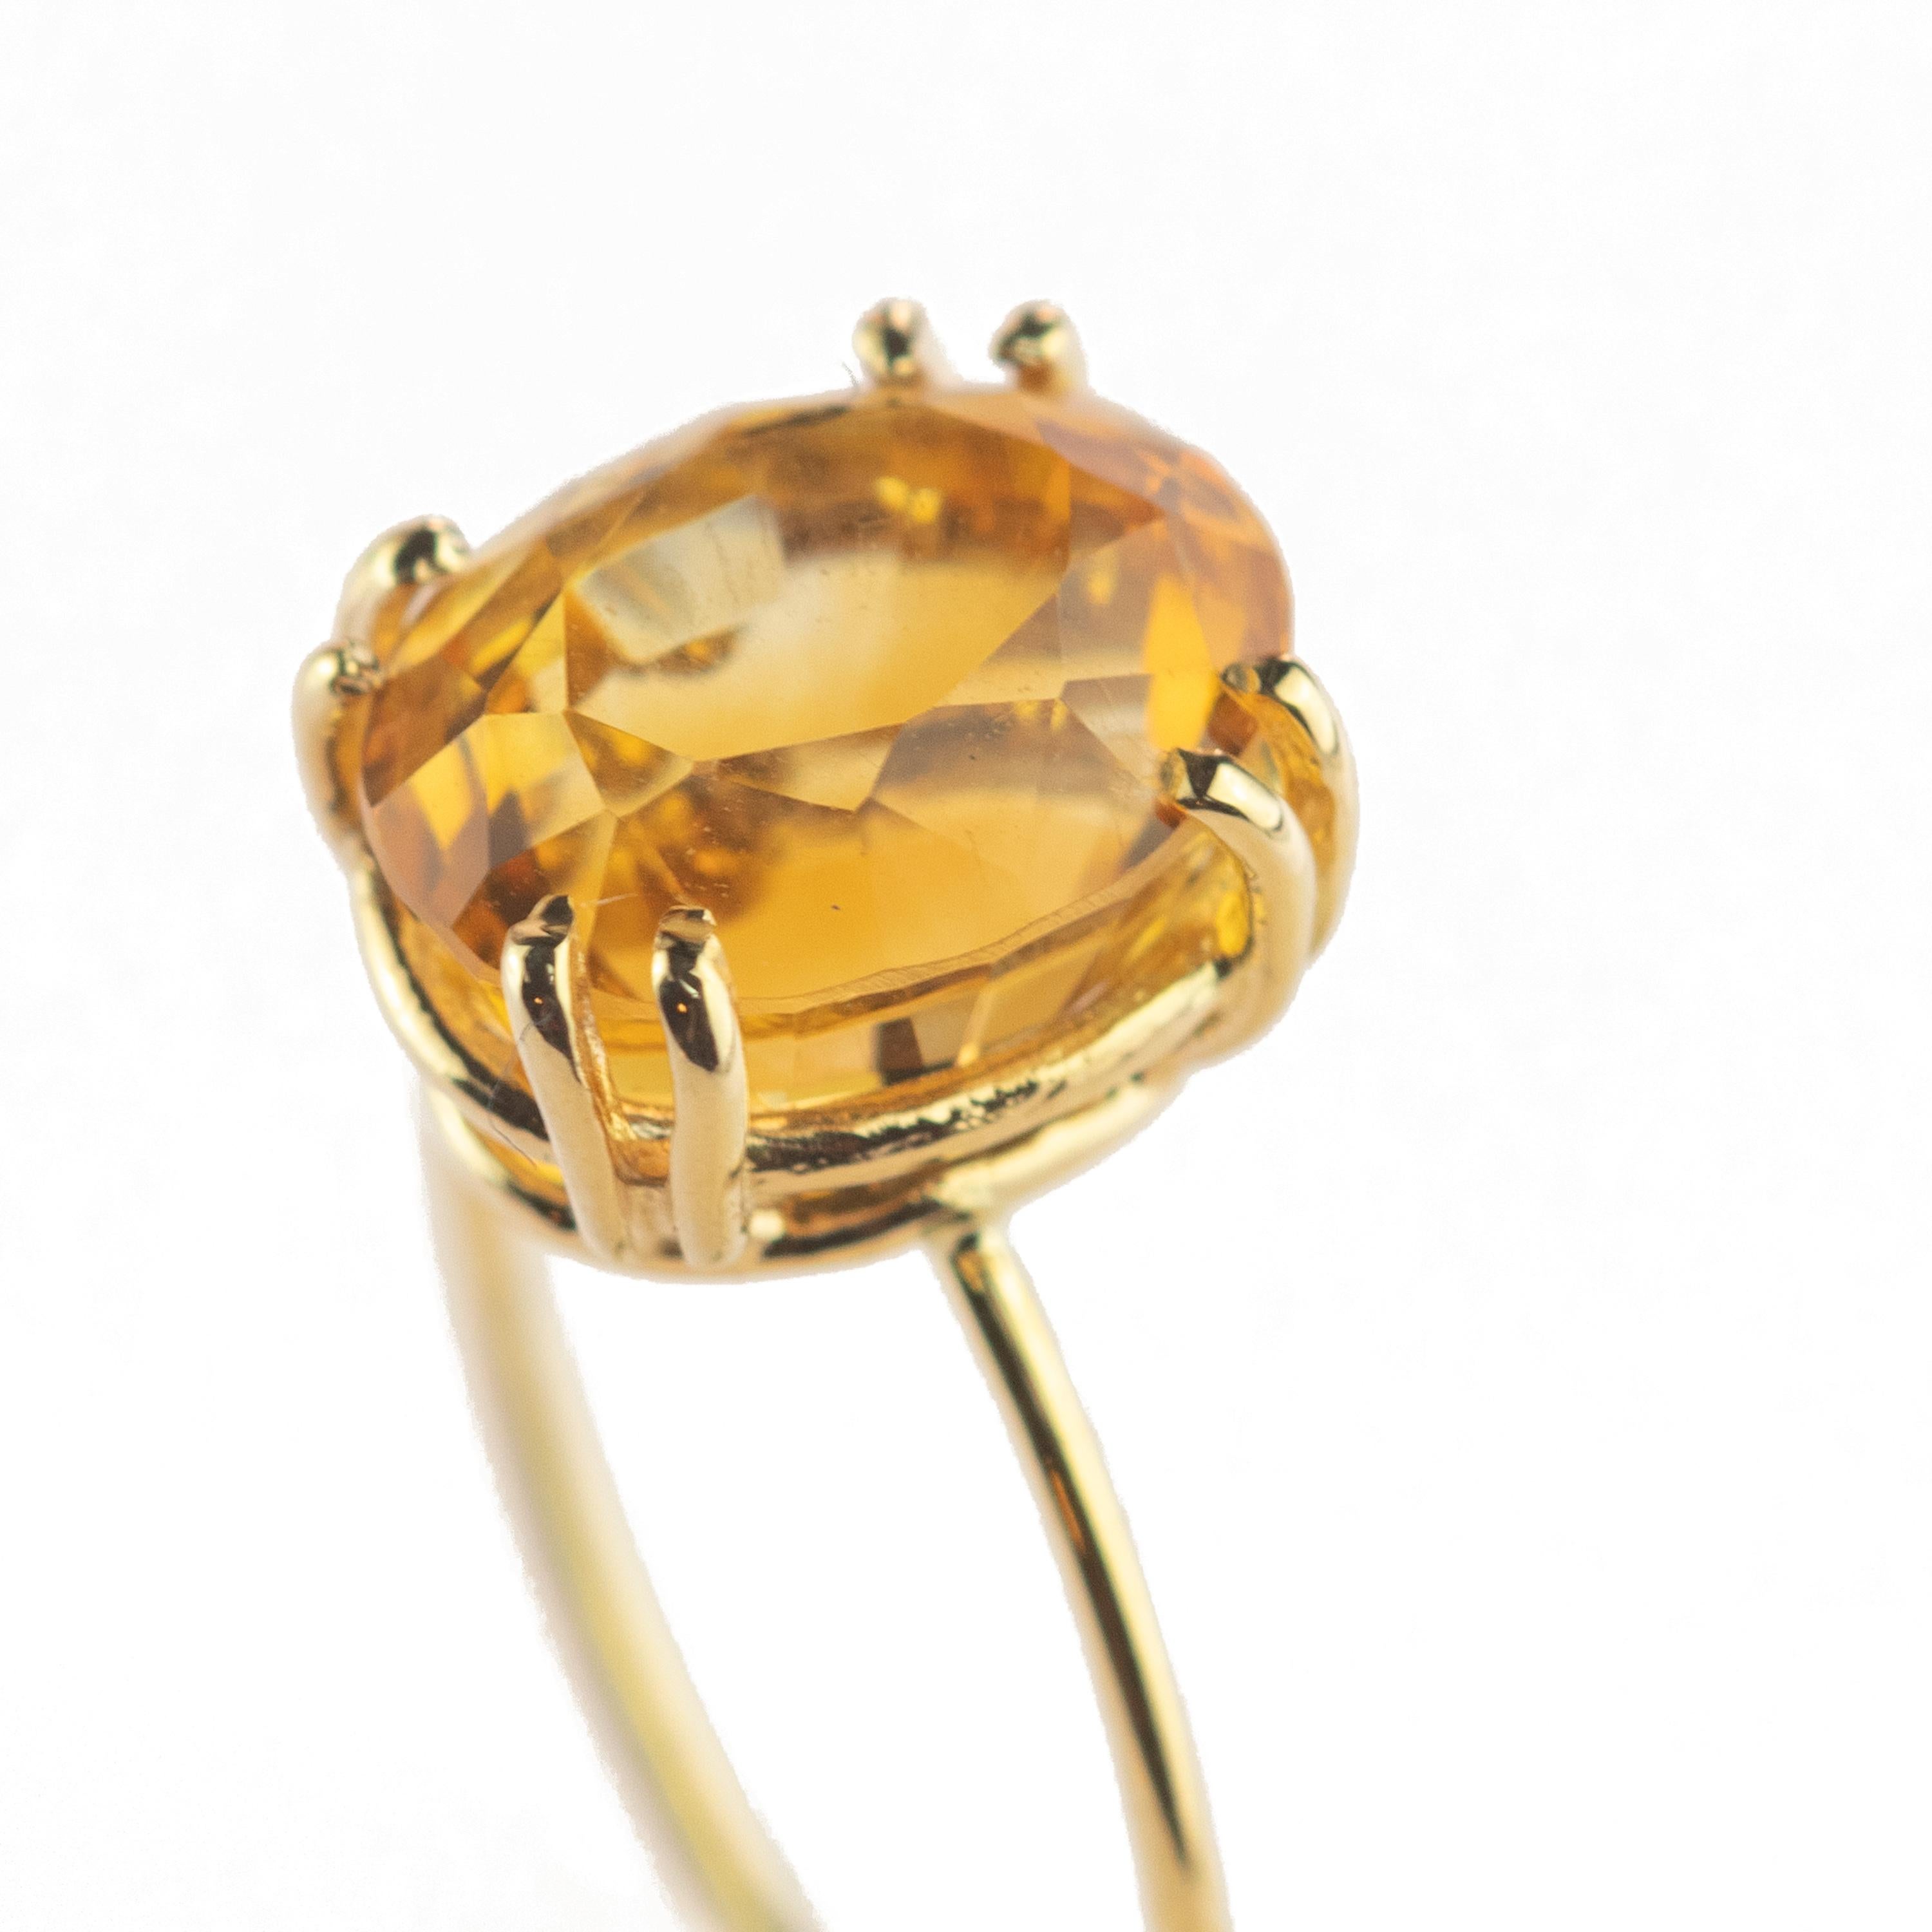 This extraordinary citrine quartz (4 carats) ring. All artfully set and crafted in 9k yellow gold to create this stunning piece of jewelry. This artwork is for a fresh, young and modern woman.
 
Inspired by the sun, the quartz resembles the fire